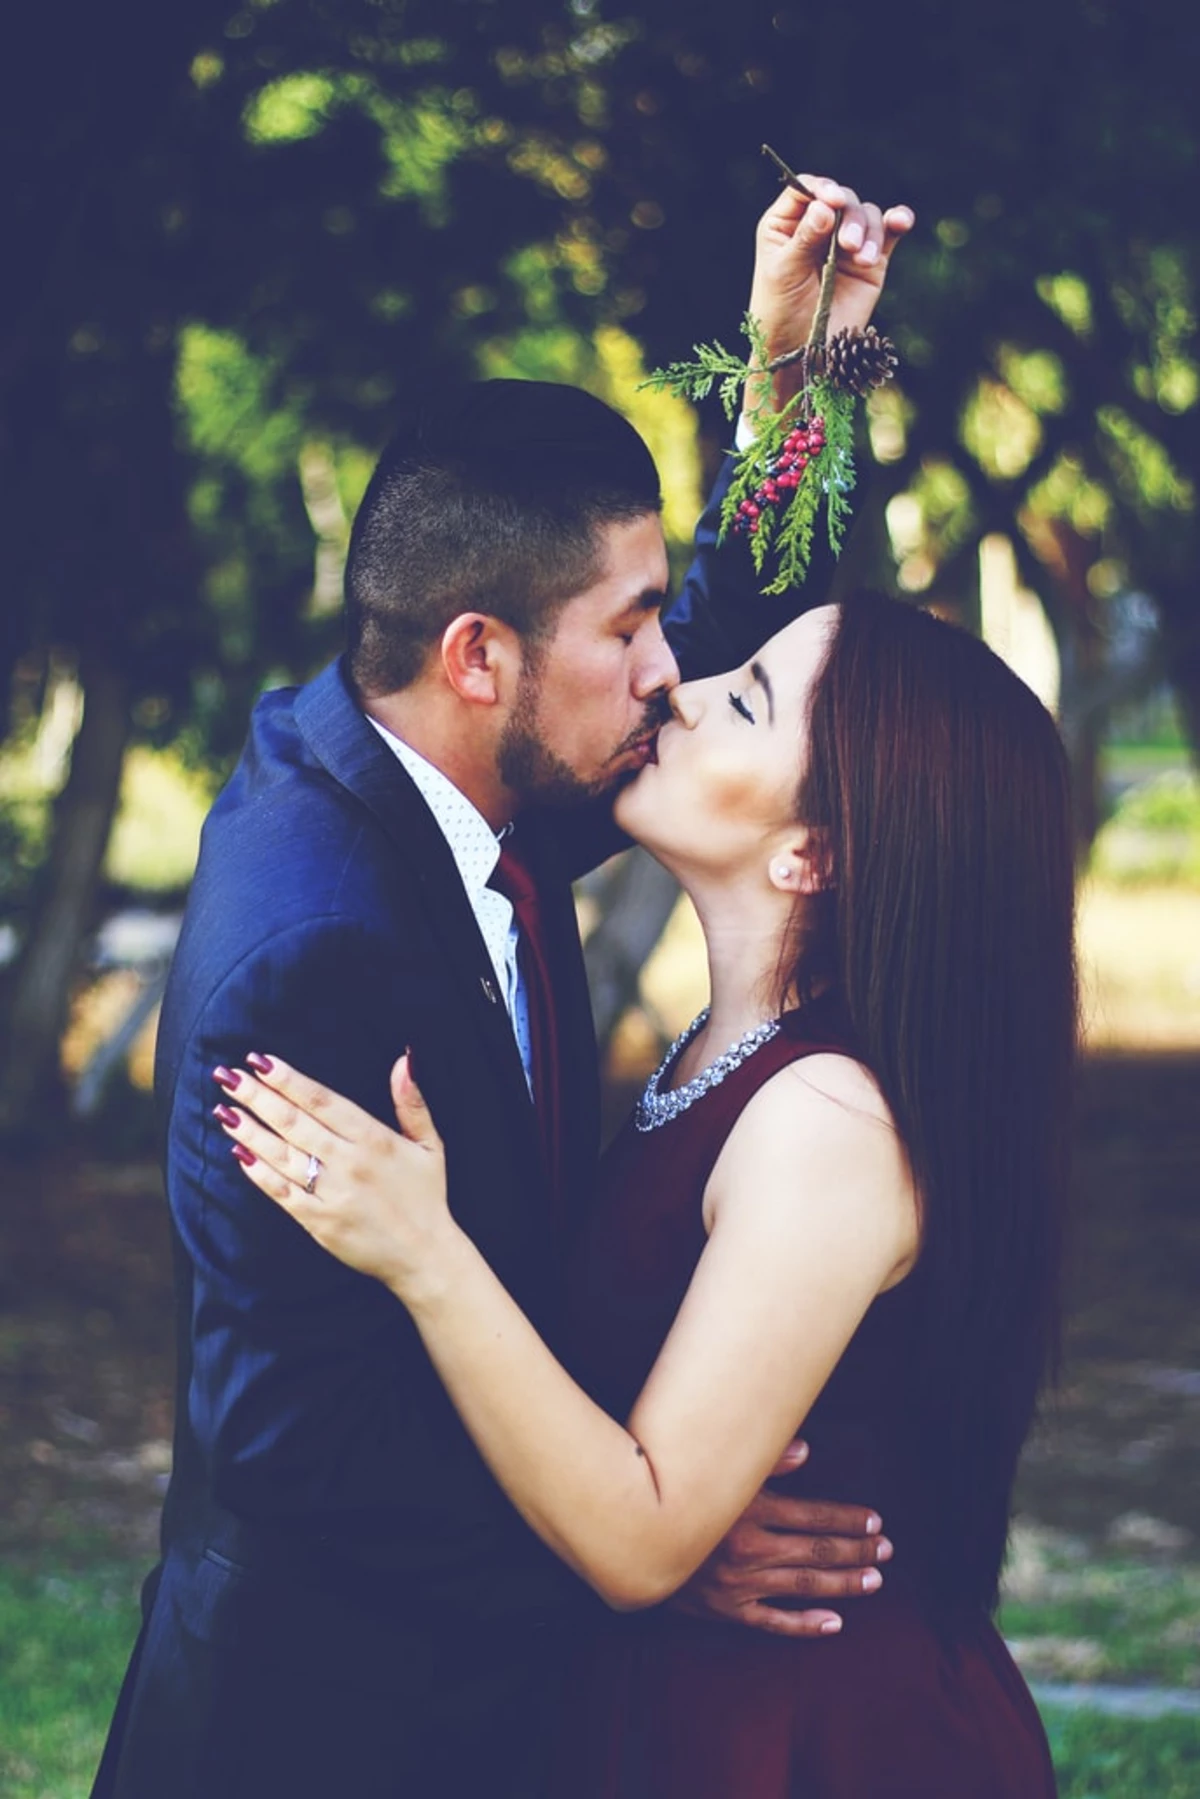 Kissing Under the Mistletoe Meaning a bit Different Than We Knew